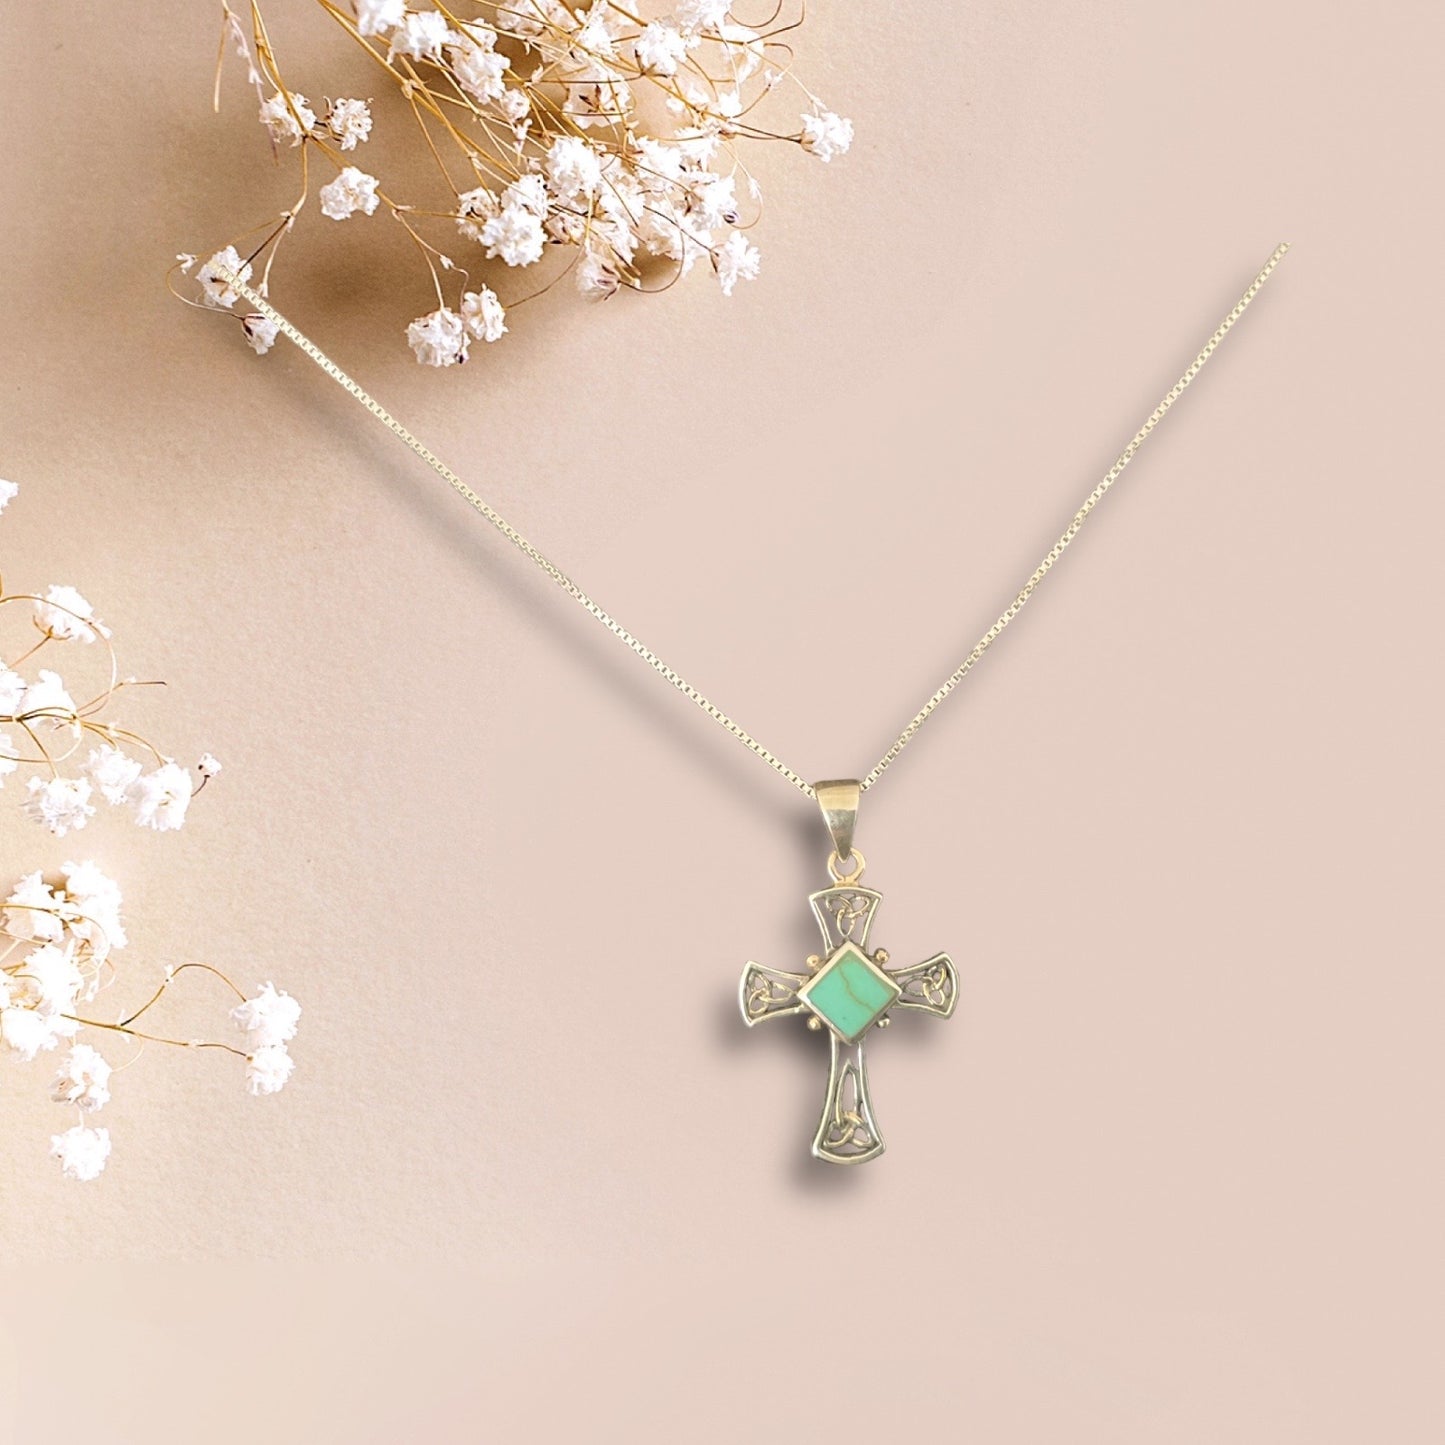 925 Sterling Silver Celtic Trinity/ Triquetra Turquoise Knot Cross Pendant Necklace + Free Chain